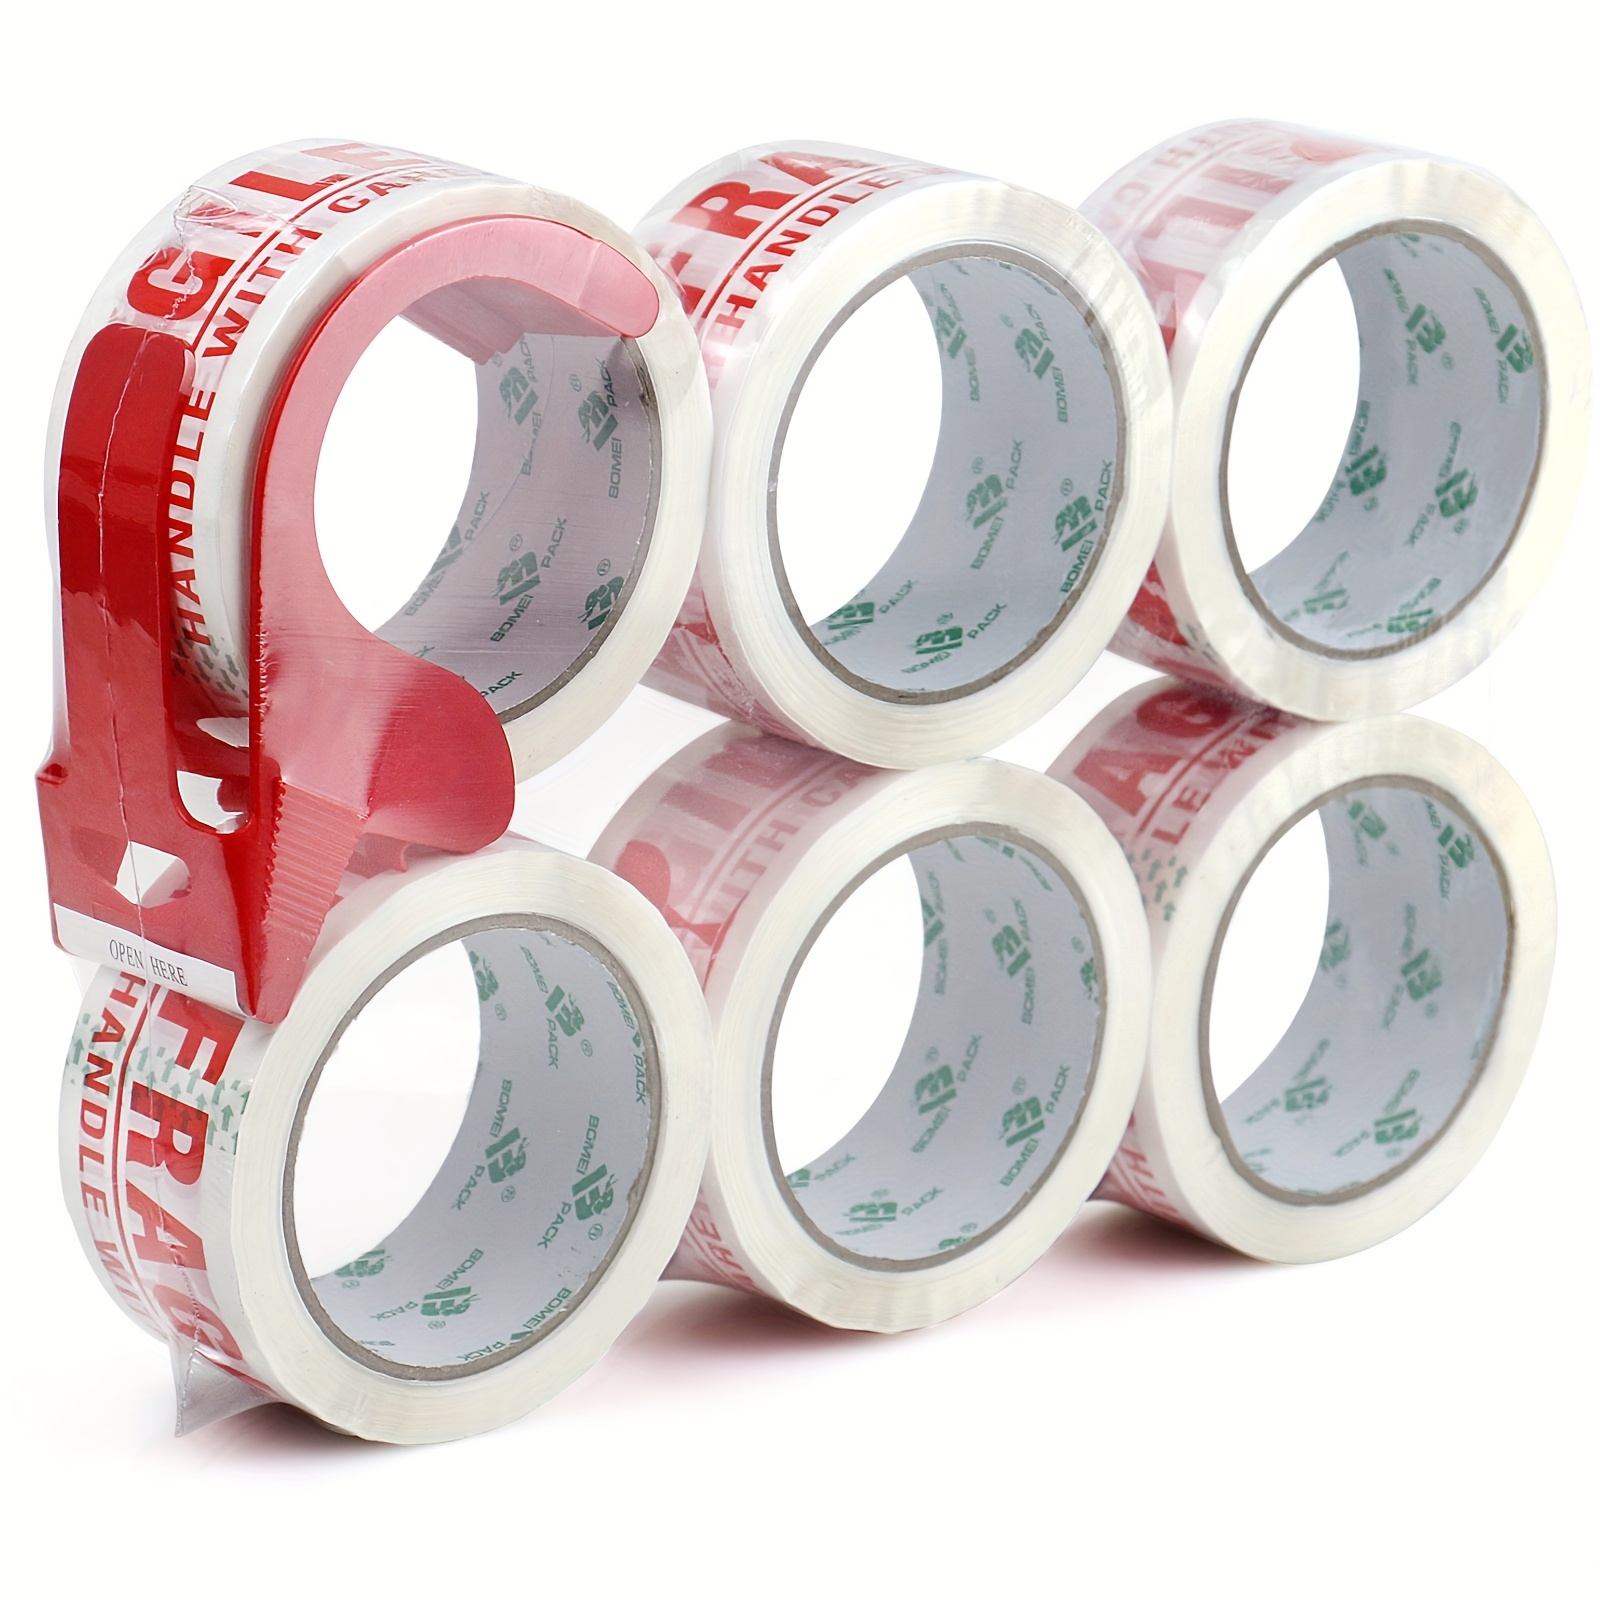 

6 Rolls Fragile Warning Packing Tape-strong Adhesive Heavy Duty Packaging Tape For Carton Sealing, Industrial Packing, Office Use- 1.89in X 72 Yard